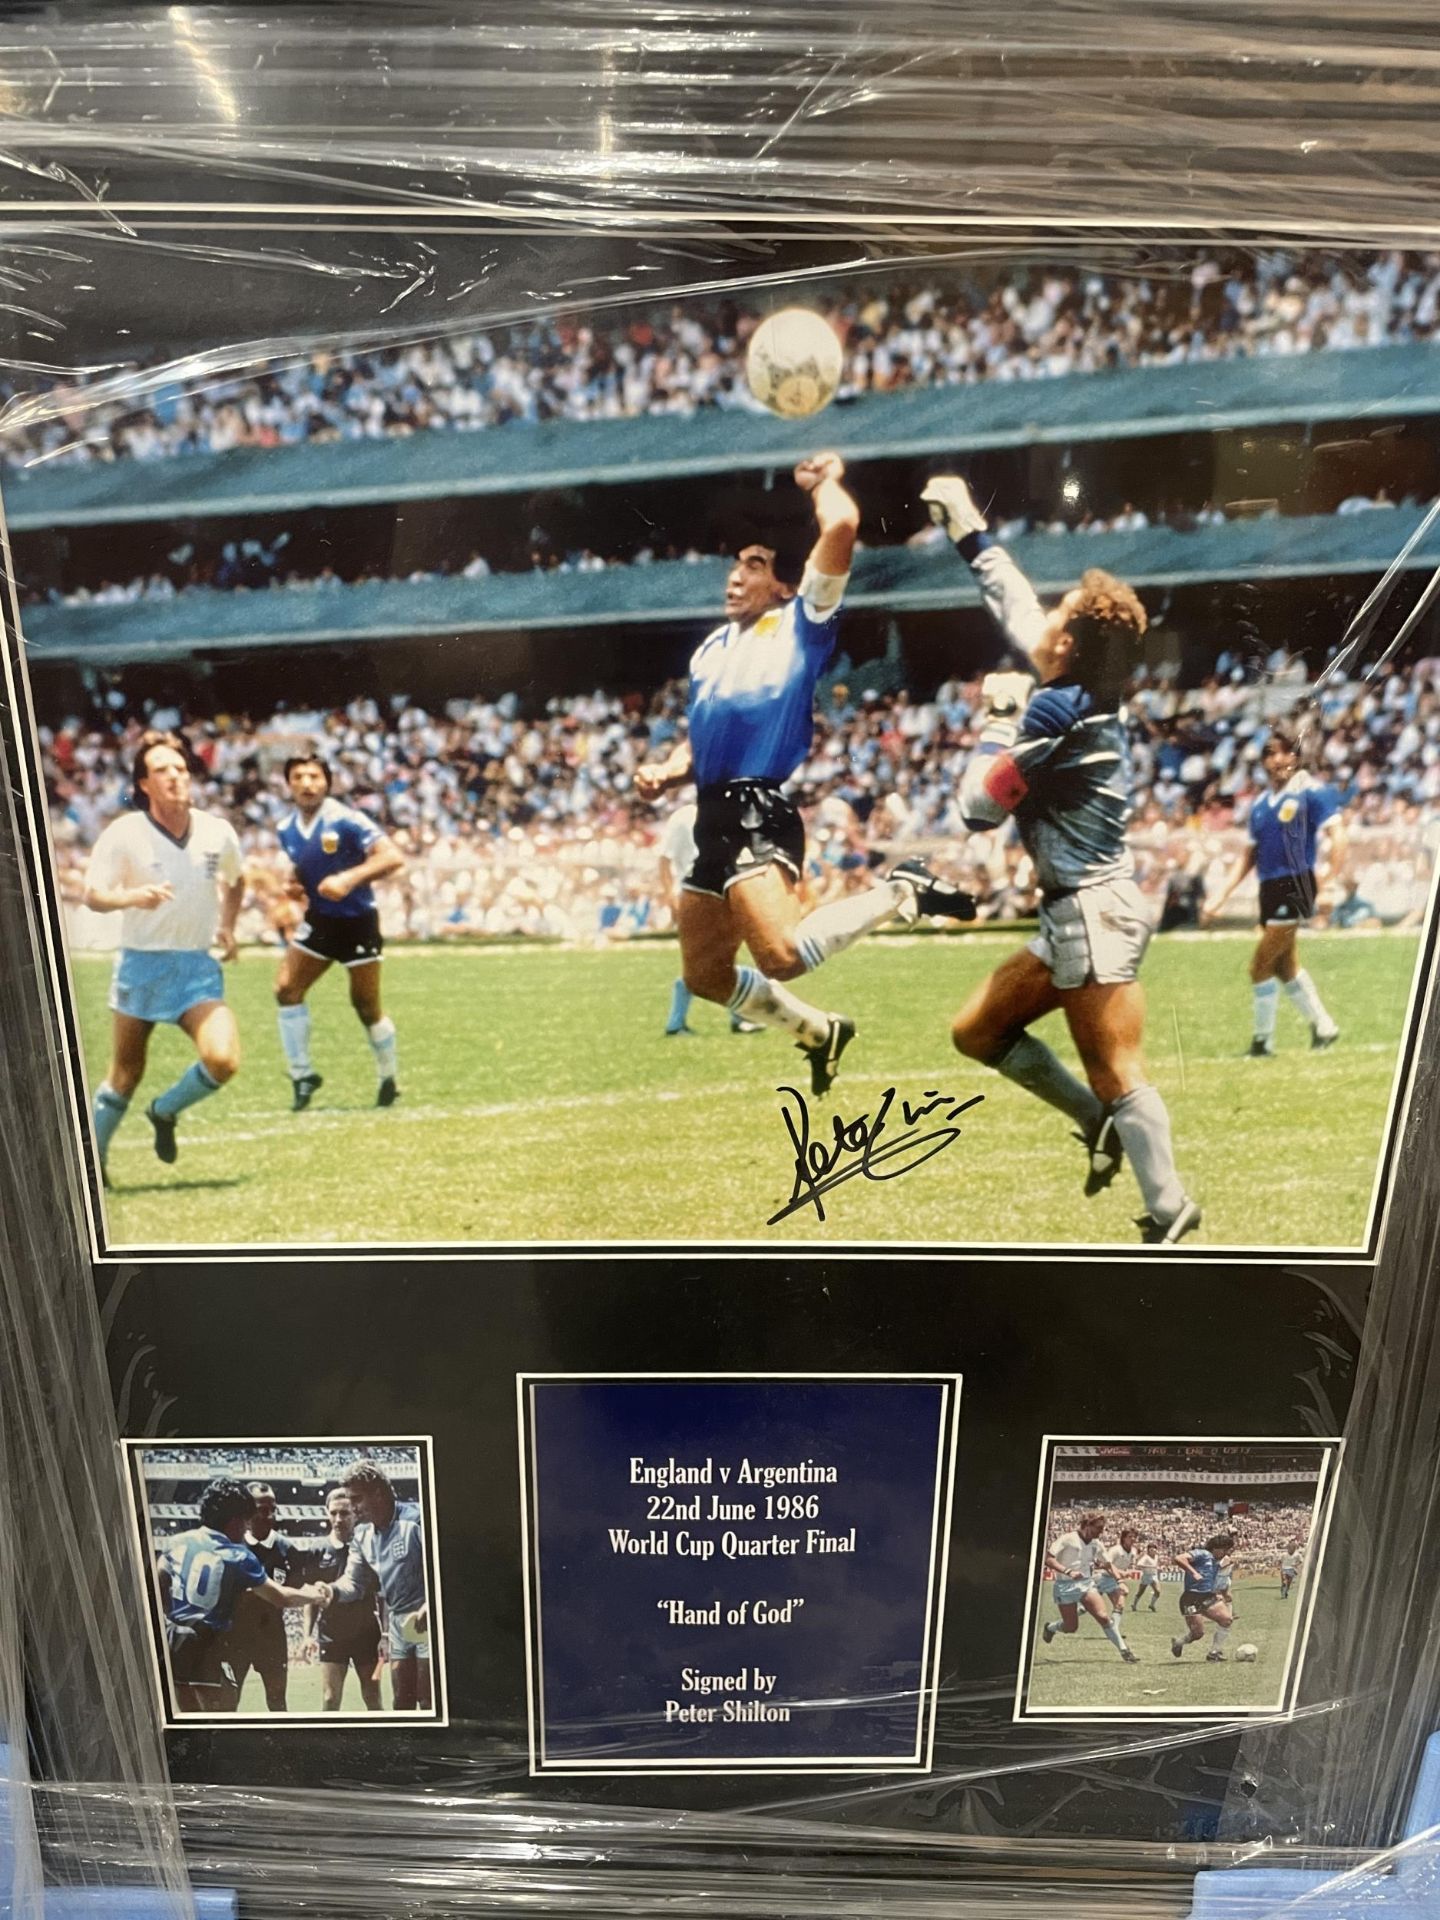 A FRAMED 1986 WORLD CUP 'HAND OF GOD' PHOTO SIGNED BY PETER SHILTON, WITH ALL STAR SIGNINGS - Image 2 of 5